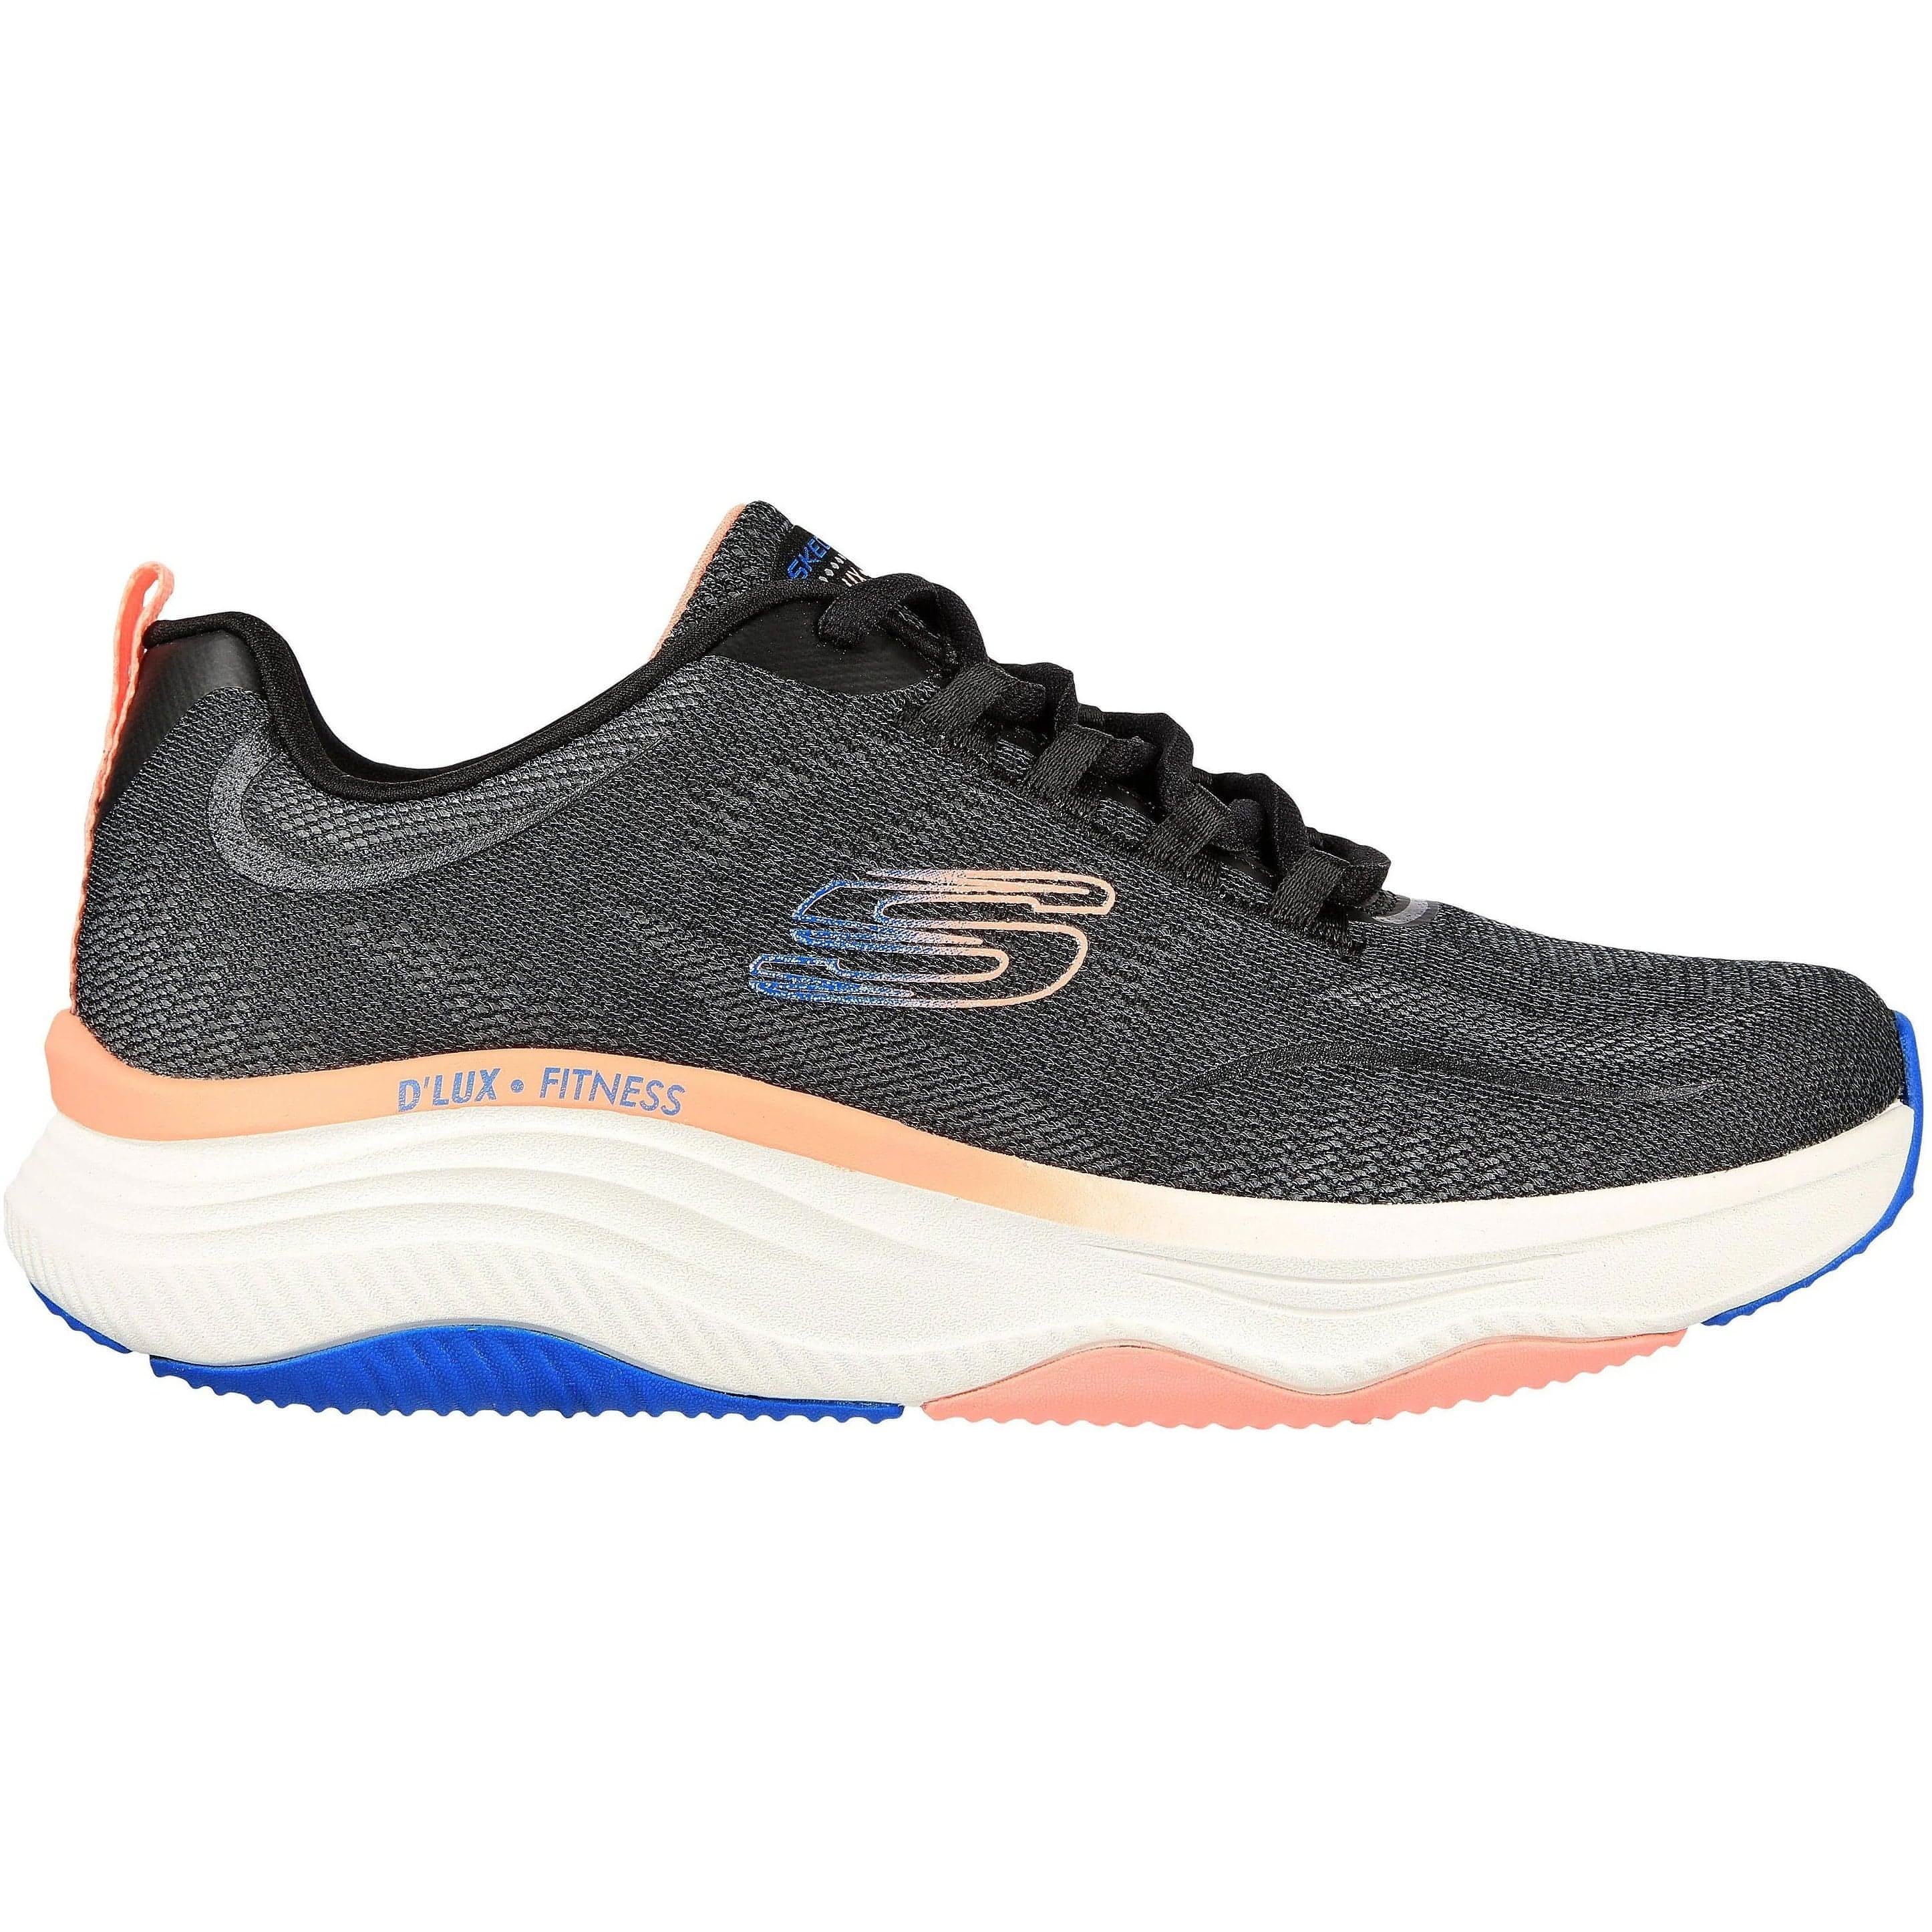 Skechers D'Lux Fitness Womens Training Shoes - Black